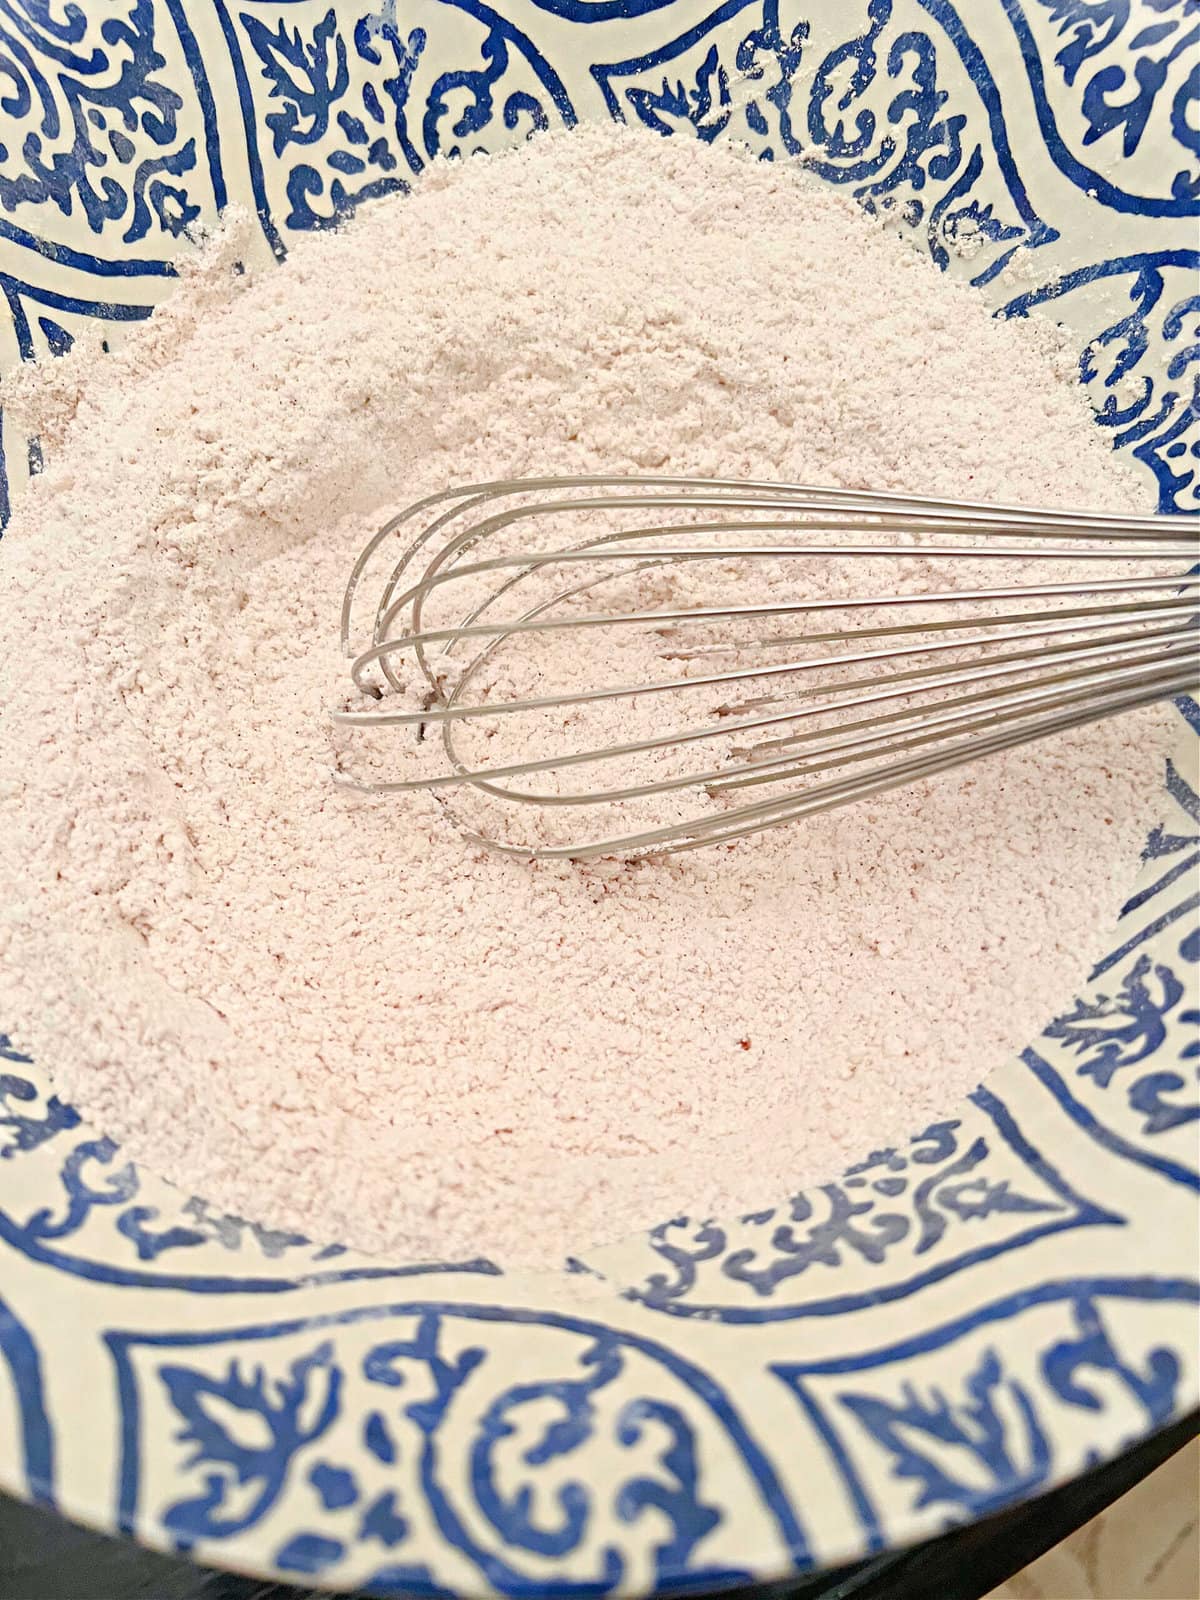 Bowl of dry ingredients and whisk.